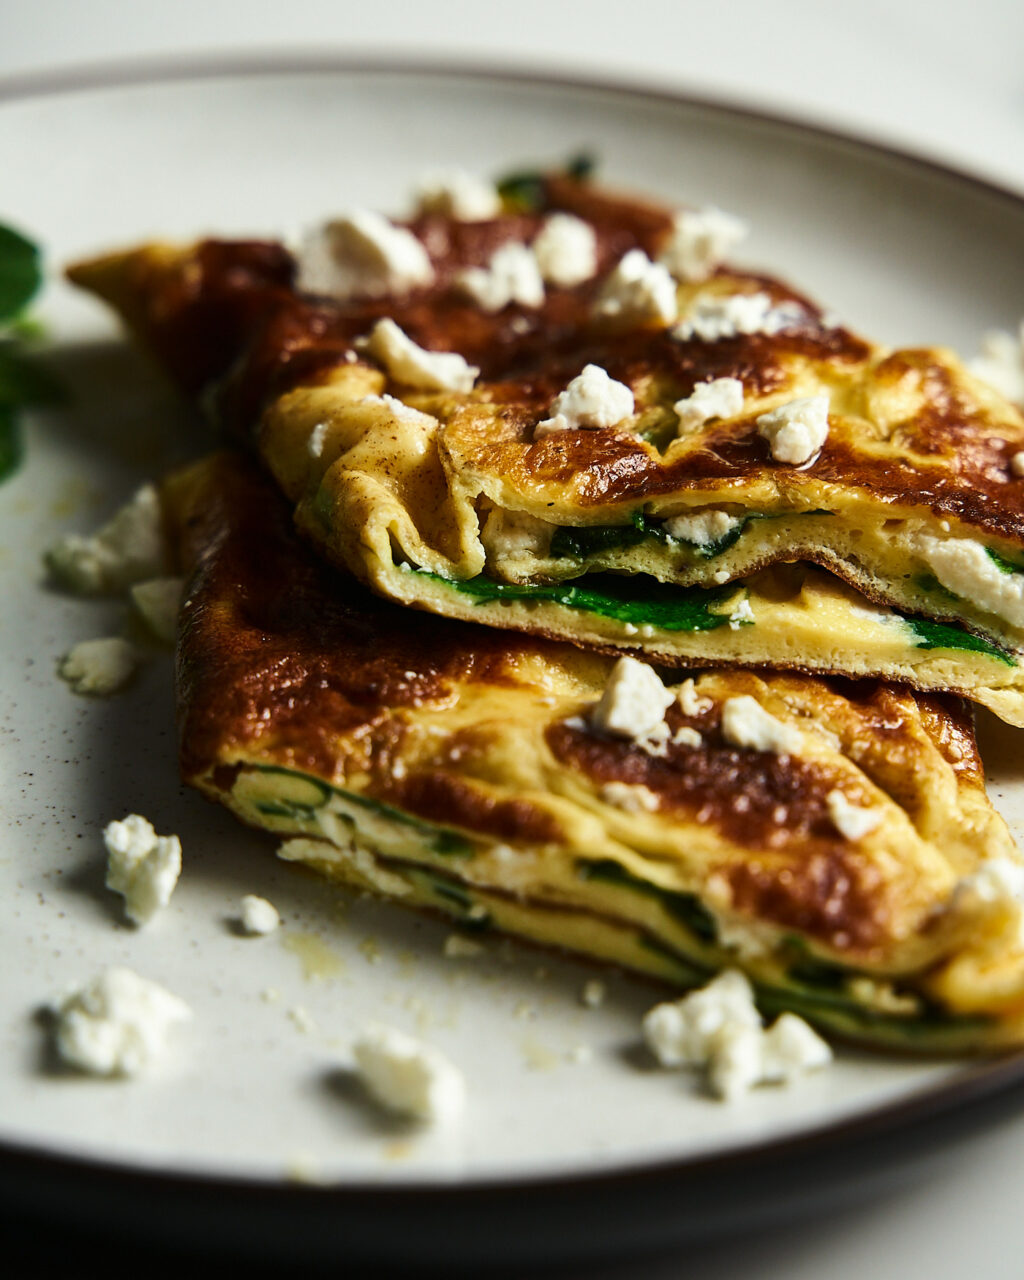 Spinach and feta omelet on a platter